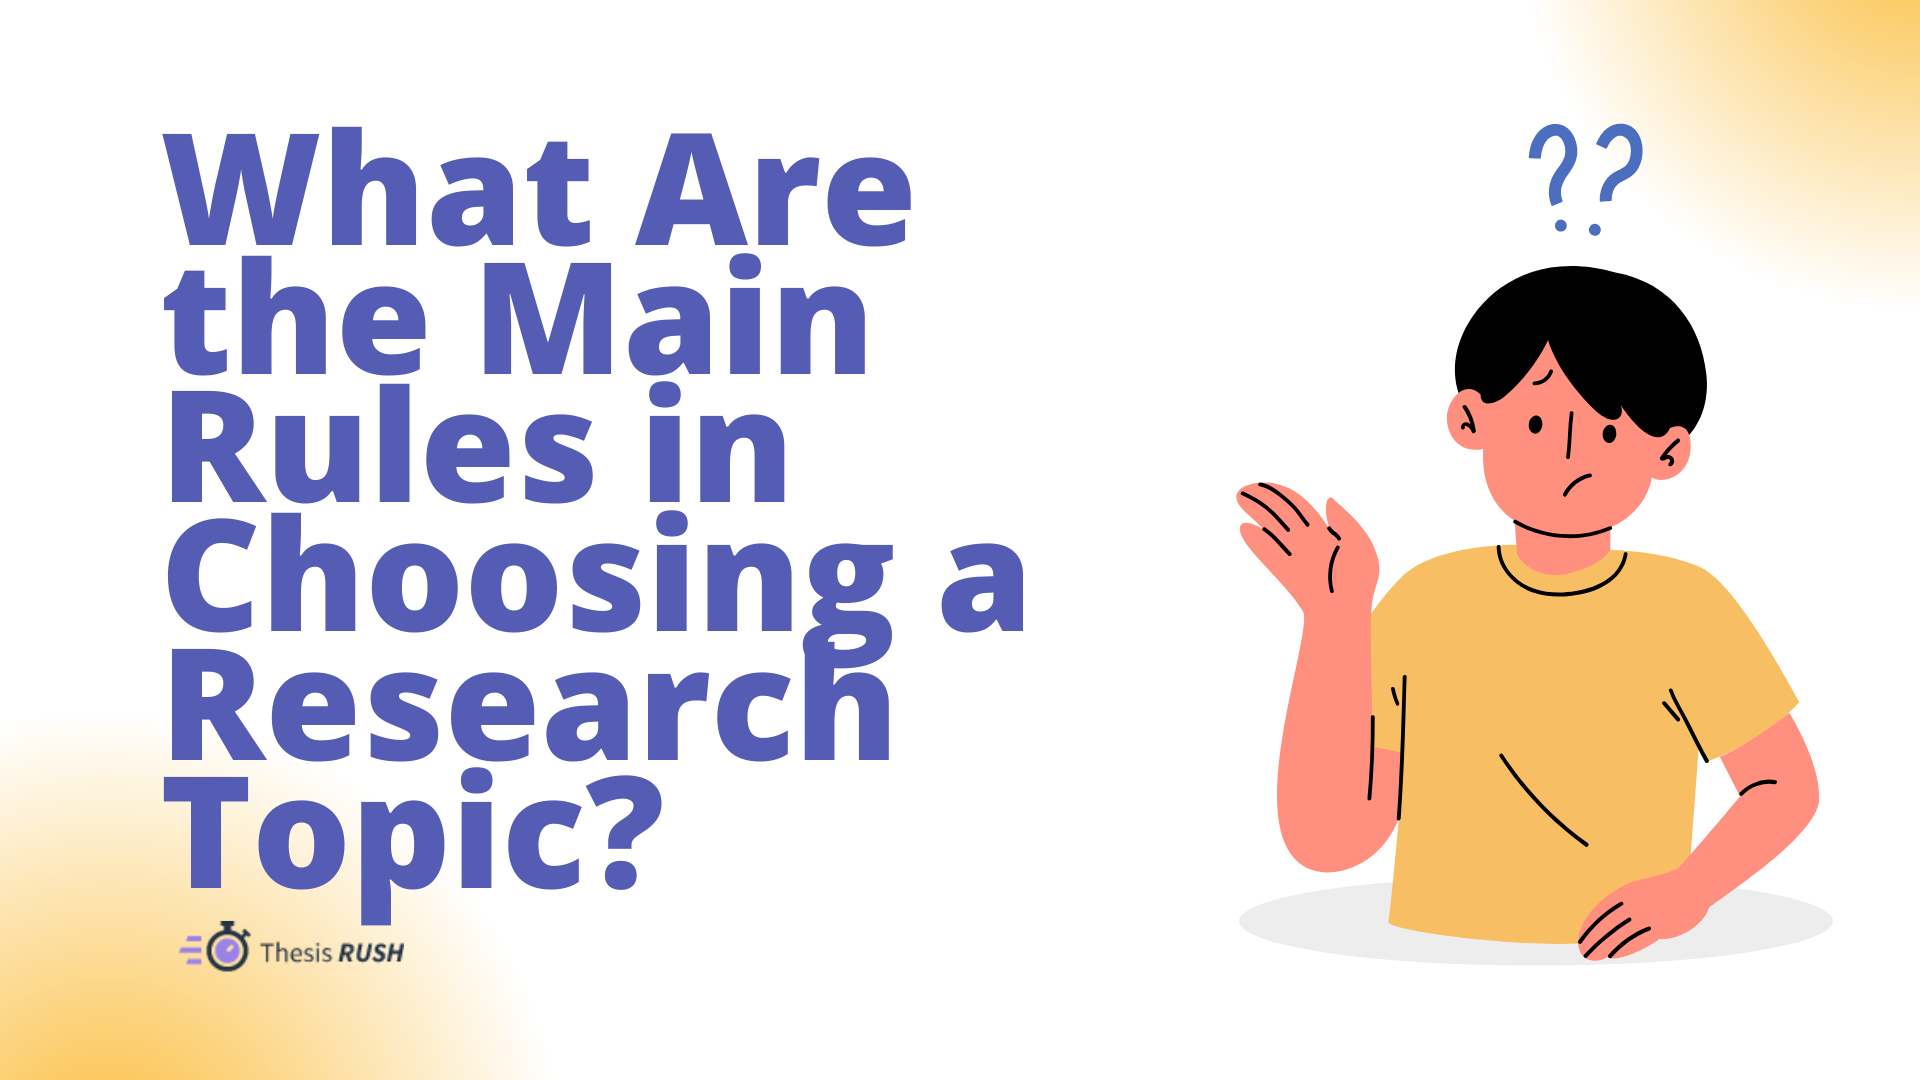 What Are the Rules in Choosing a Research Topic?